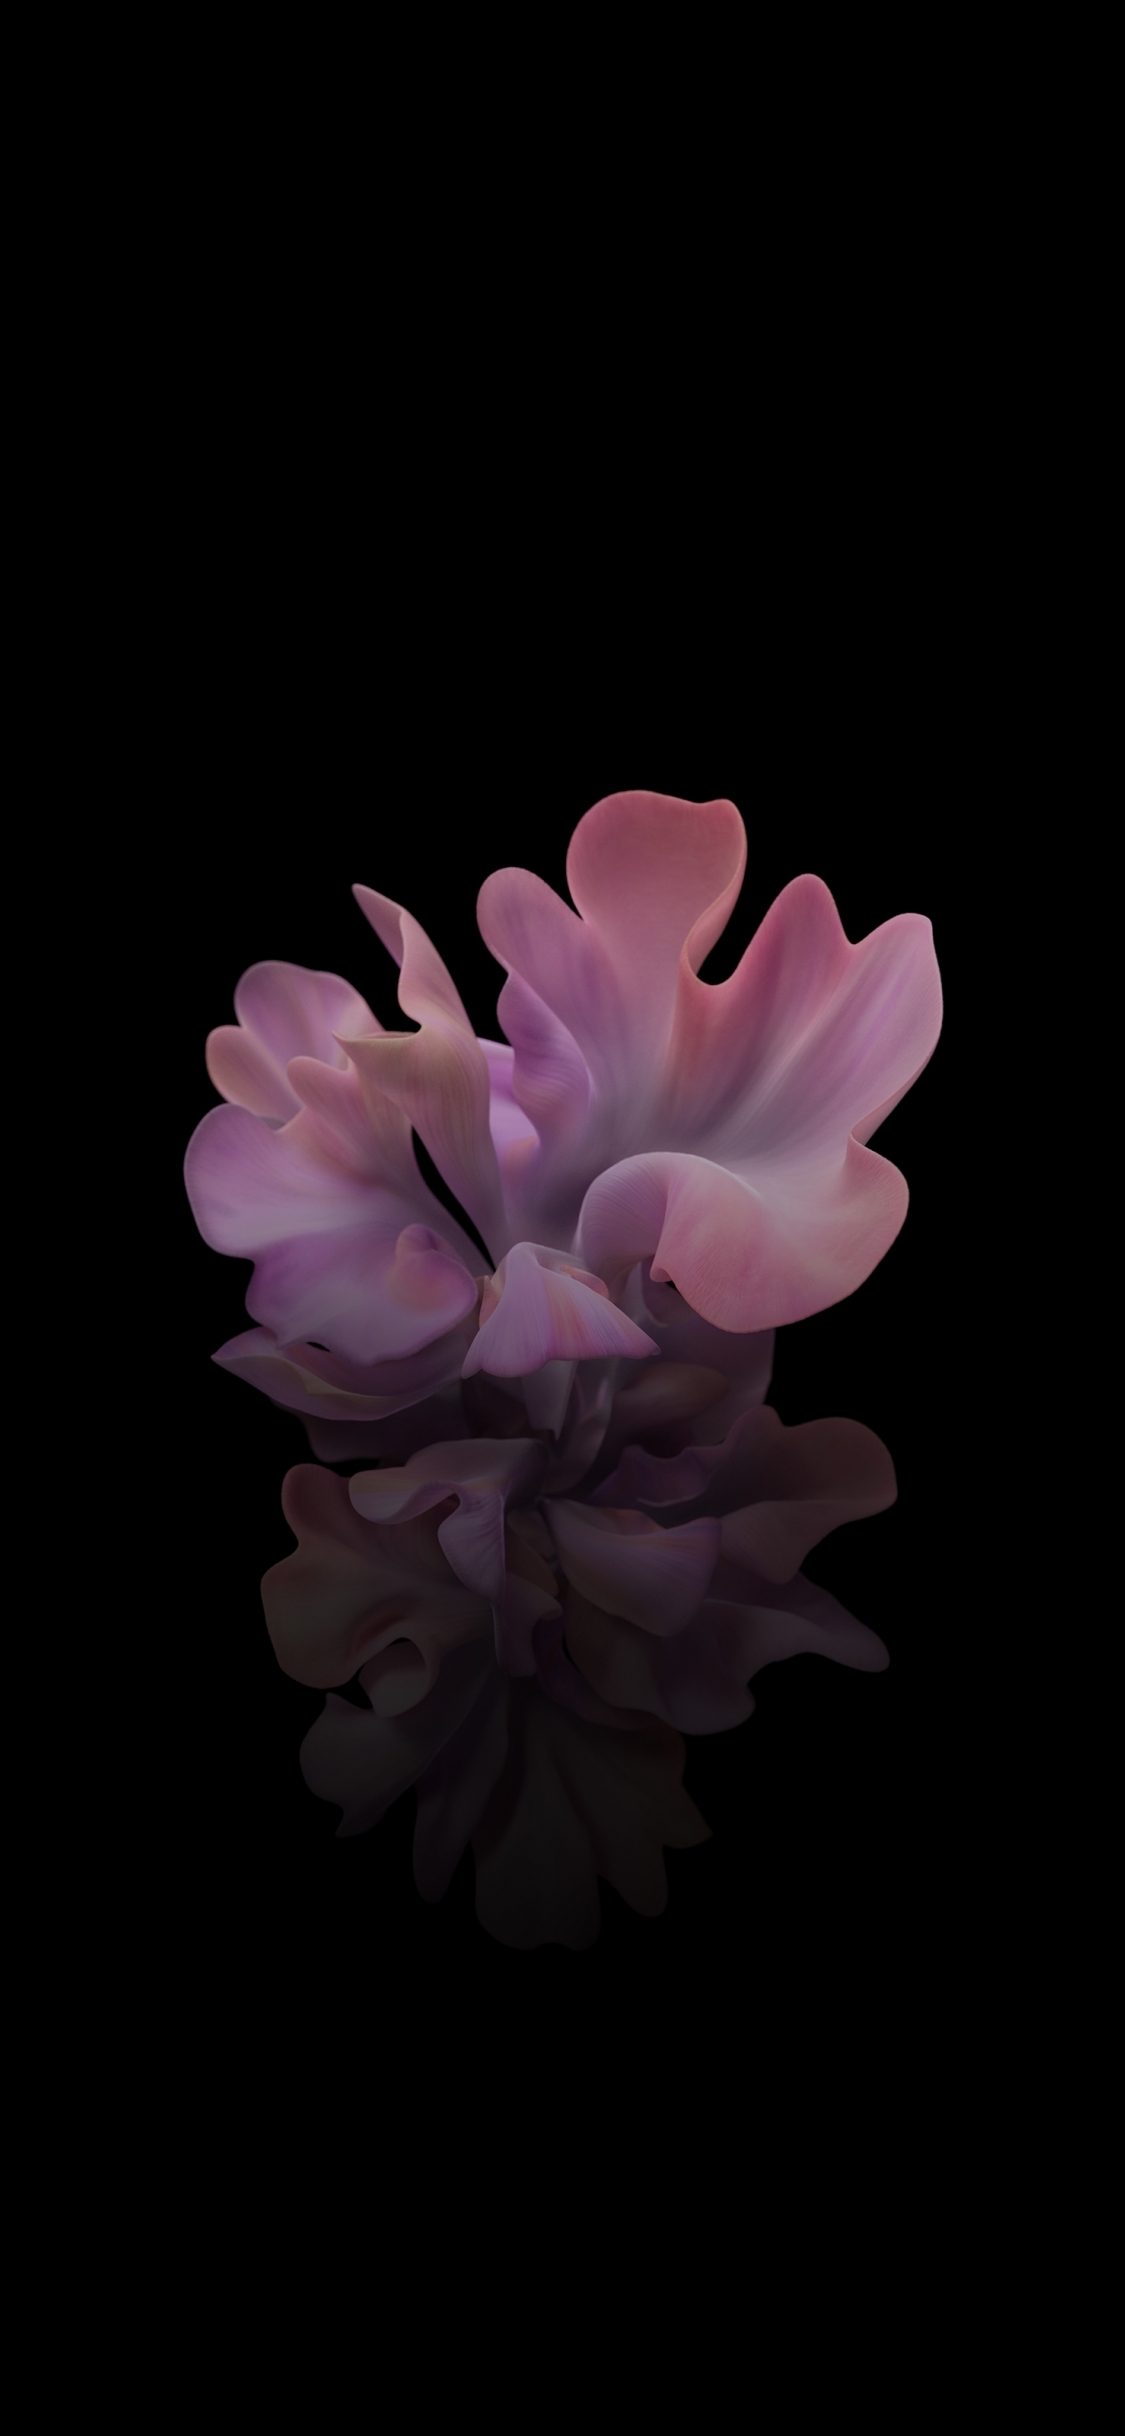 Download wallpaper 1125x2436 pink flower, reflections, stock, iphone x,  1125x2436 hd background, 25688